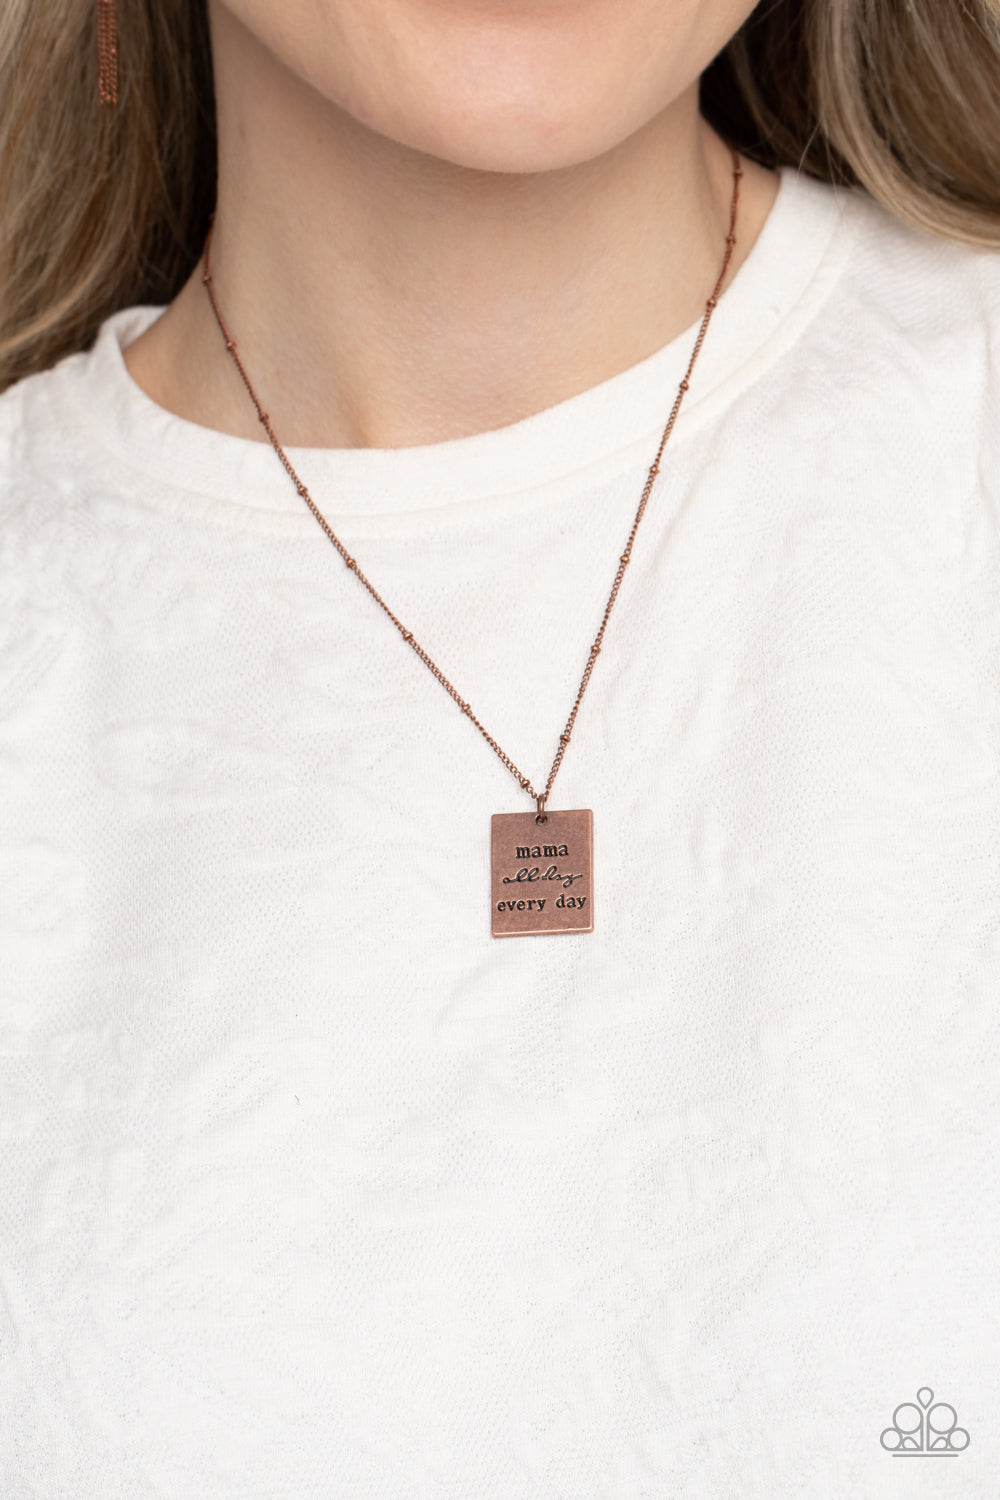 Paparazzi Accessories: Mama MVP - Copper Mothers Day Necklace